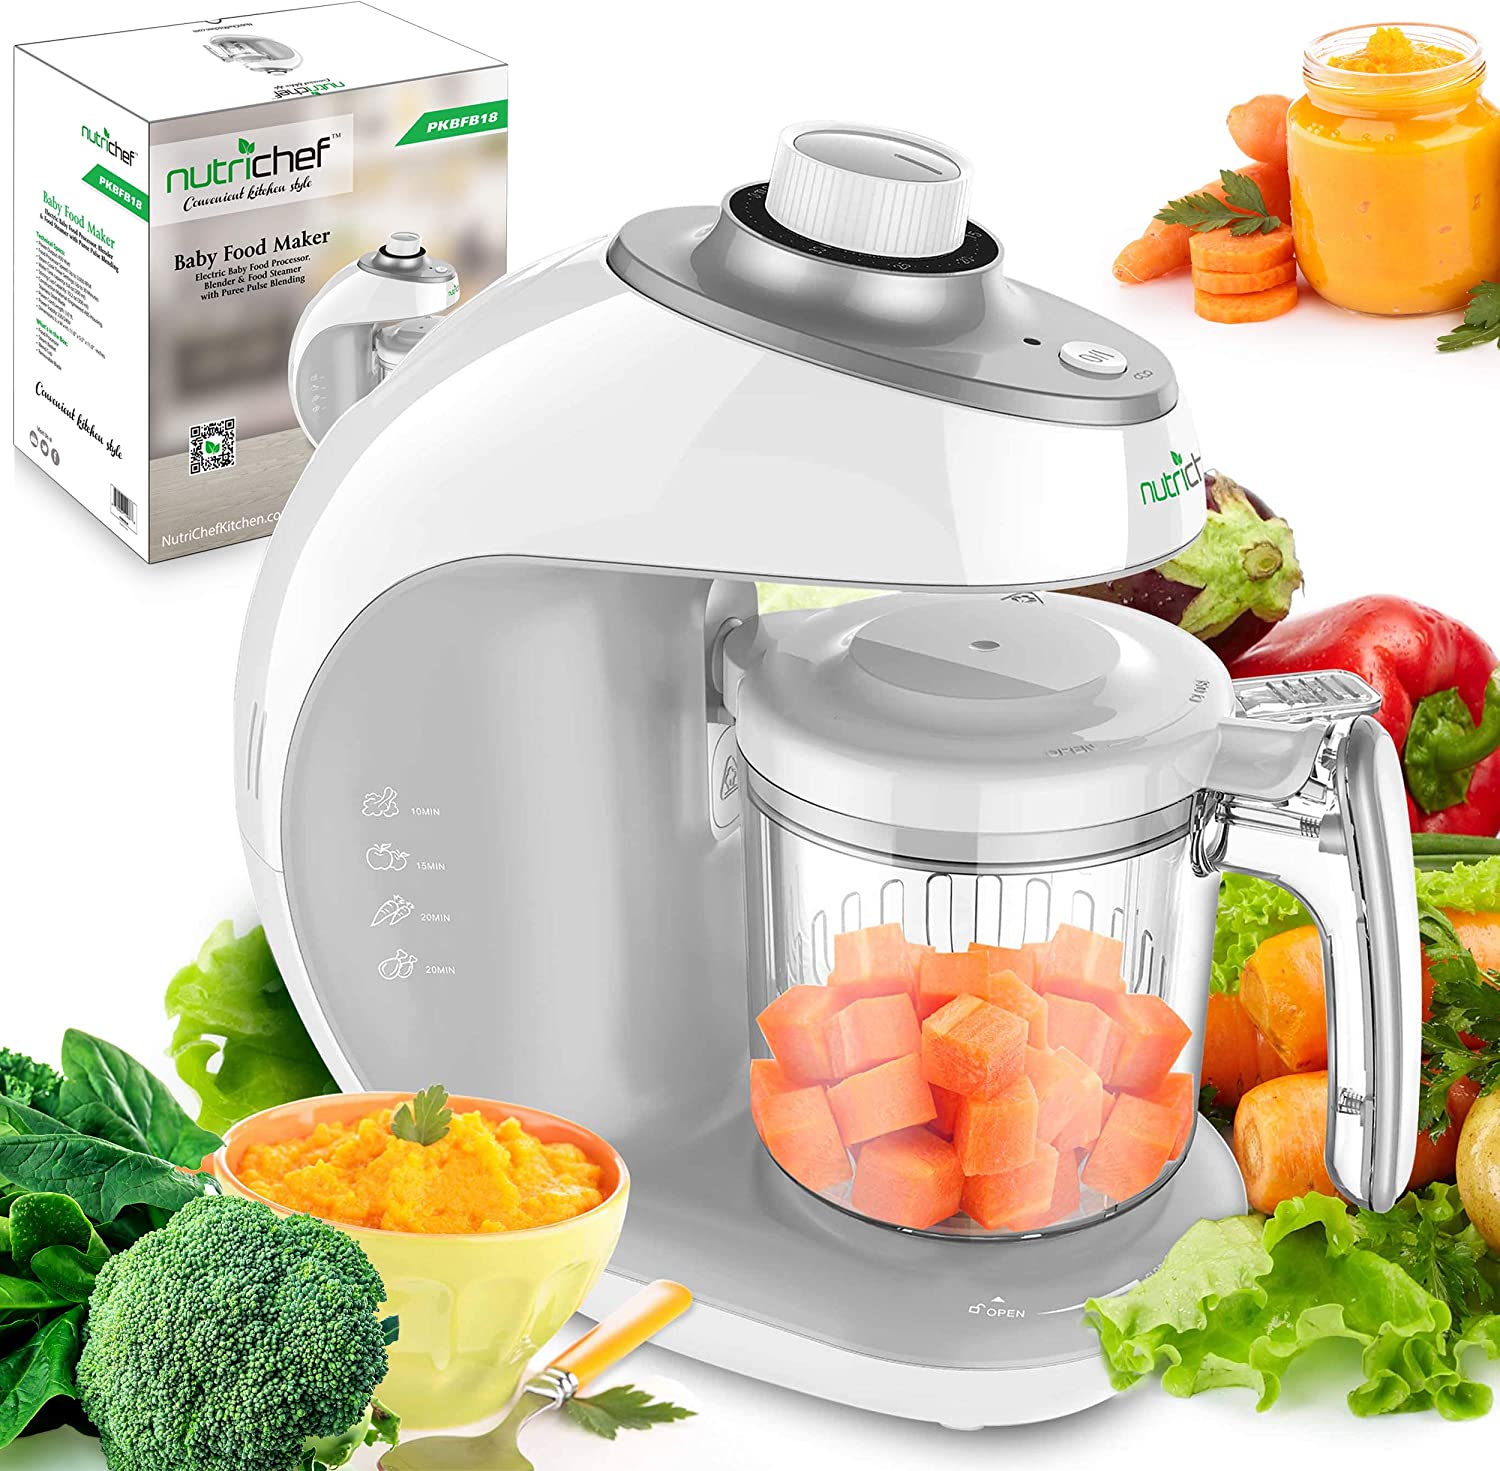 Digital Baby Food Maker Machine – 2-in-1 Steamer Cooker and Puree Blender Food Processor with Steam Timer – Steam Blend Organic Homemade Food for Newborn Babies, Infants, Toddlers – NutriChef PKBFB18